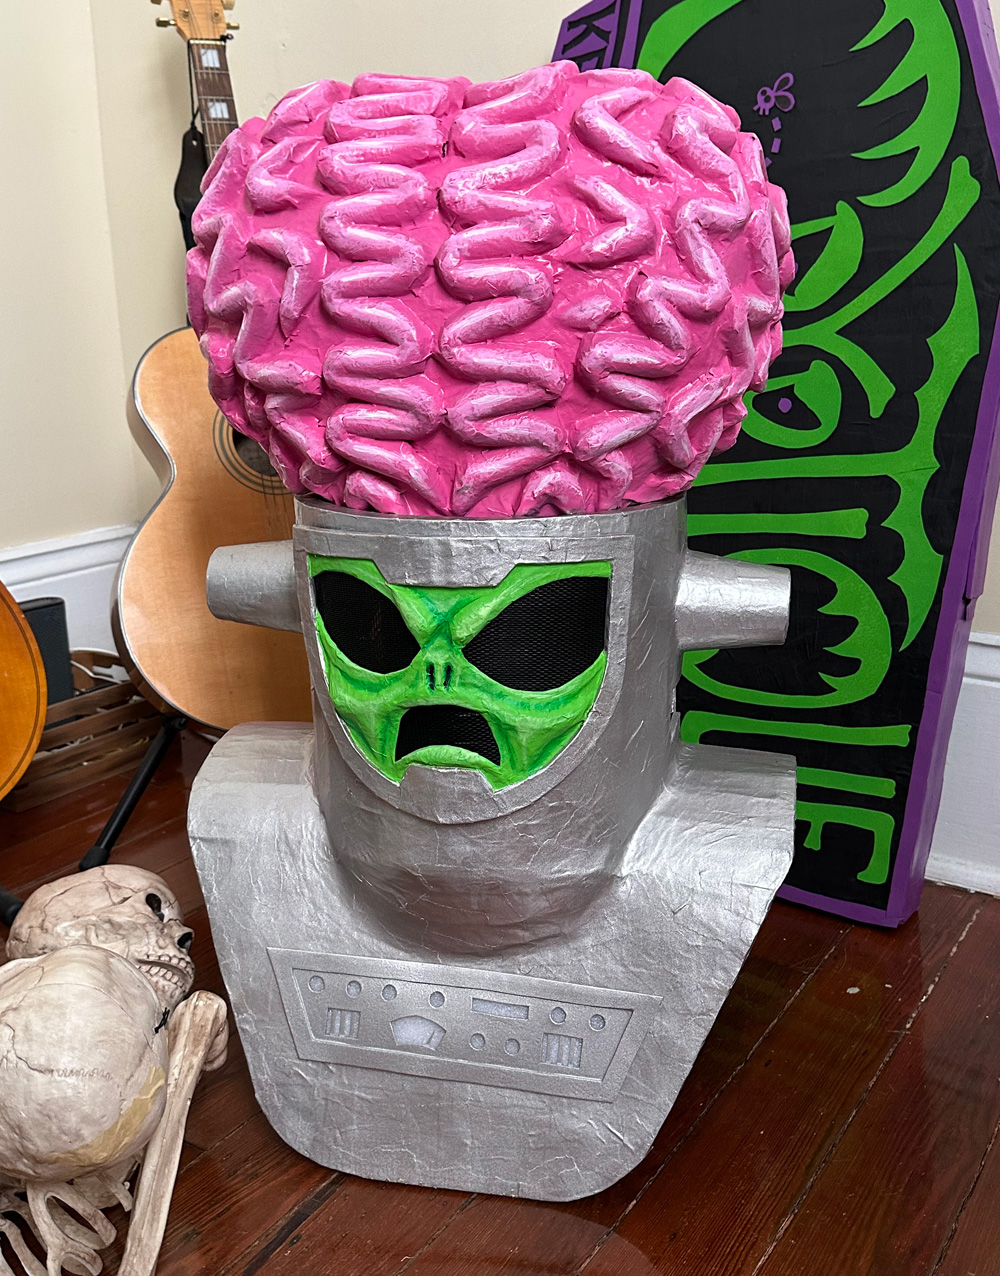 The alien mask with brain highlights painted on, and the face attached